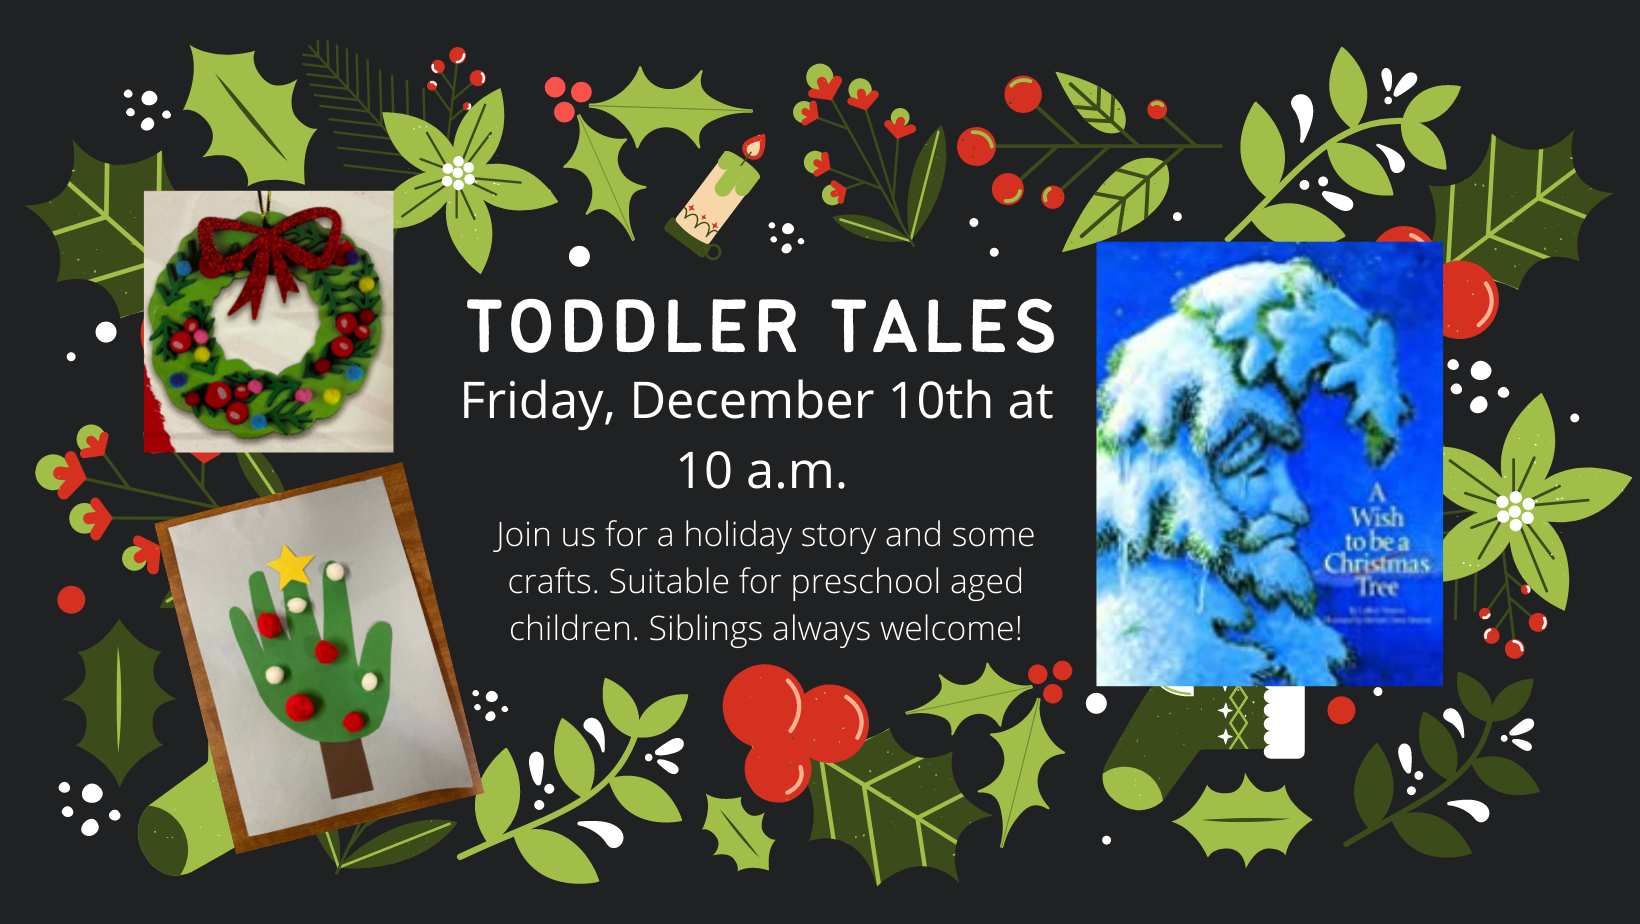 Toddler Tales: A Holiday Story